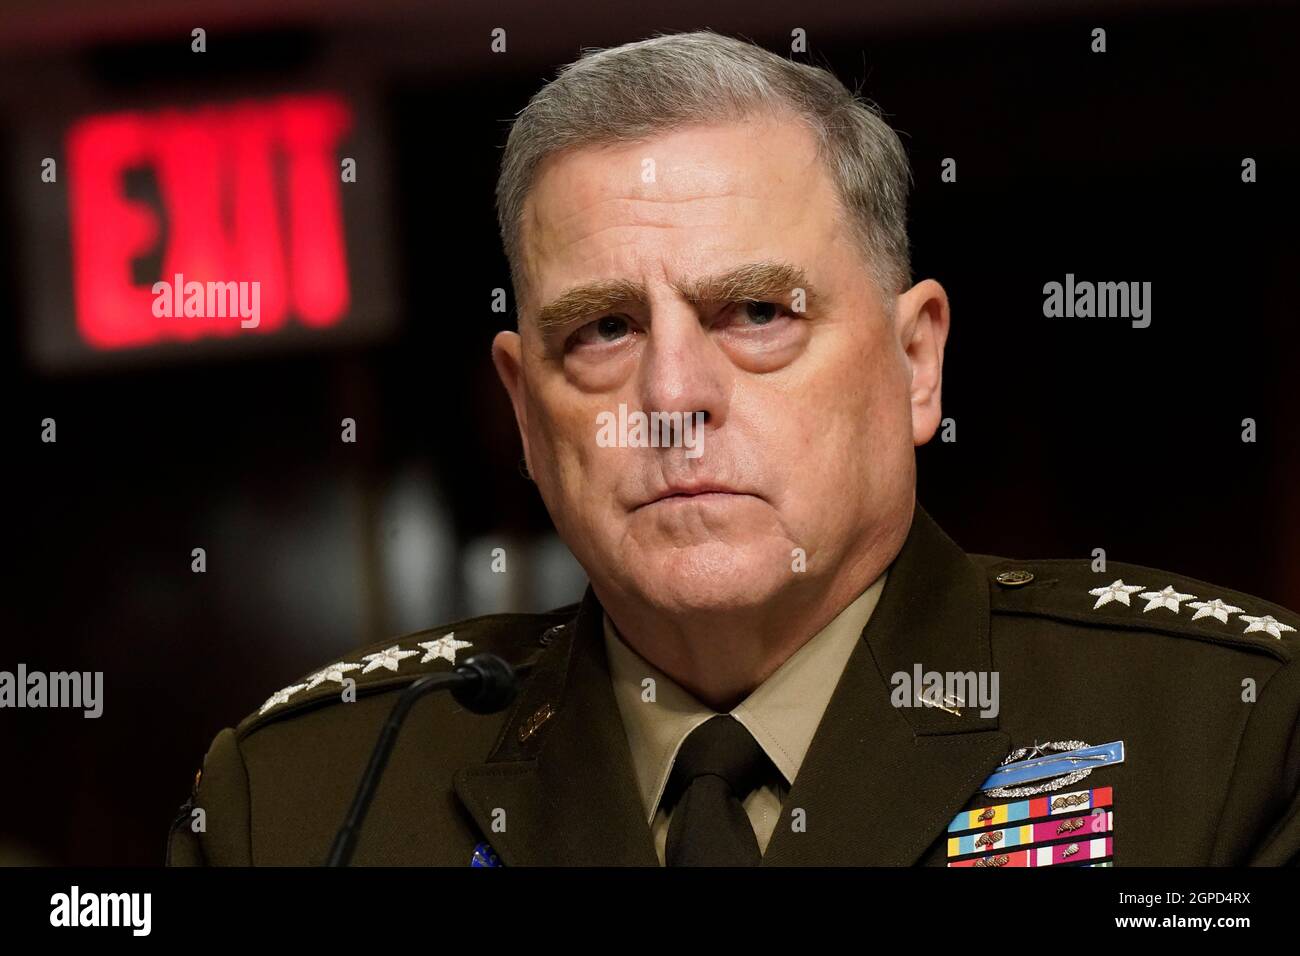 (210929) -- WASHINGTON, Sept. 29, 2021 (Xinhua) -- Chairman of the U.S. Joint Chiefs of Staff Gen. Mark Milley testifies during a Senate Armed Services Committee hearing in Washington, DC, the United States, on Sept. 28, 2021. Gen. Mark Milley, chairman of the U.S. Joint Chiefs of Staff, said on Tuesday during a Senate hearing that it is a 'strategic failure' with the Taliban back in power and U.S. withdrawal from Afghanistan. Milley, alongside Secretary of Defense Lloyd Austin and U.S. Central Command head Gen. Kenneth McKenzie, testified for the first time before Congress since the Unite Stock Photo